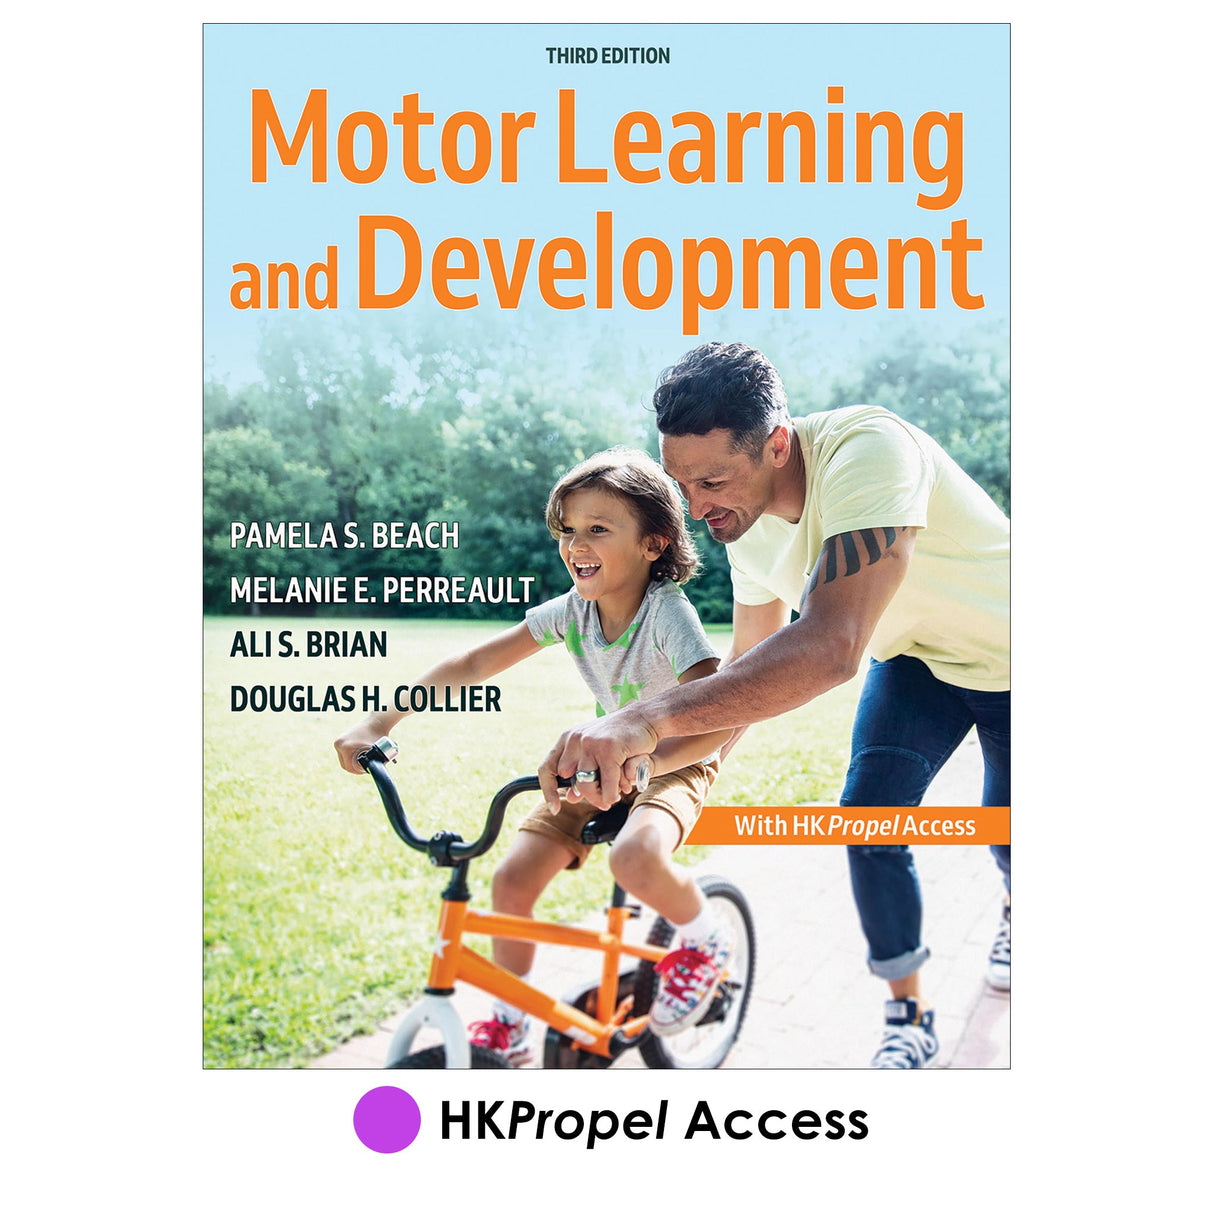 Motor Learning and Development 3rd Edition HKPropel Access